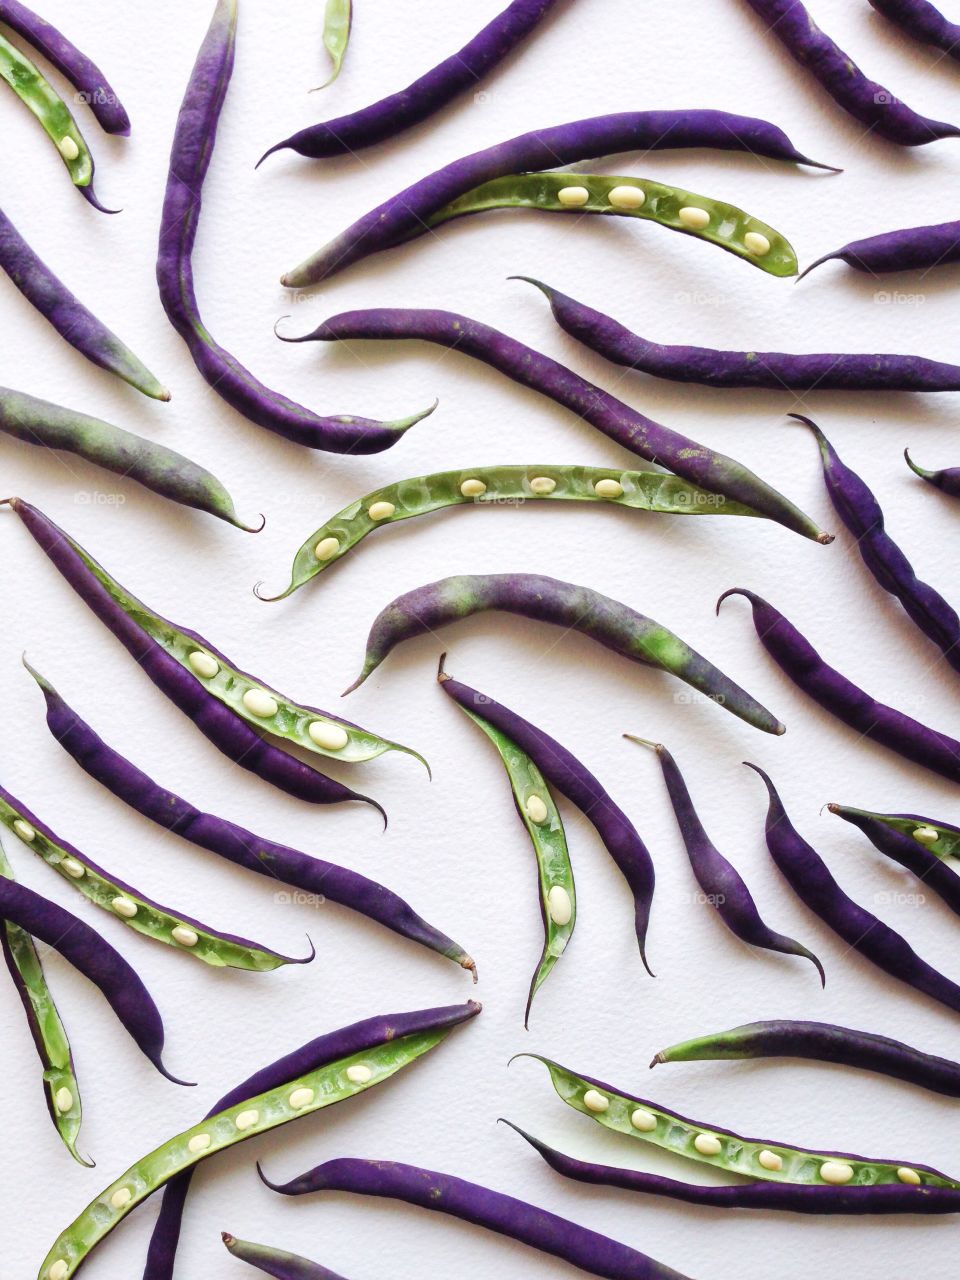 Purple hull peas collage on a white background